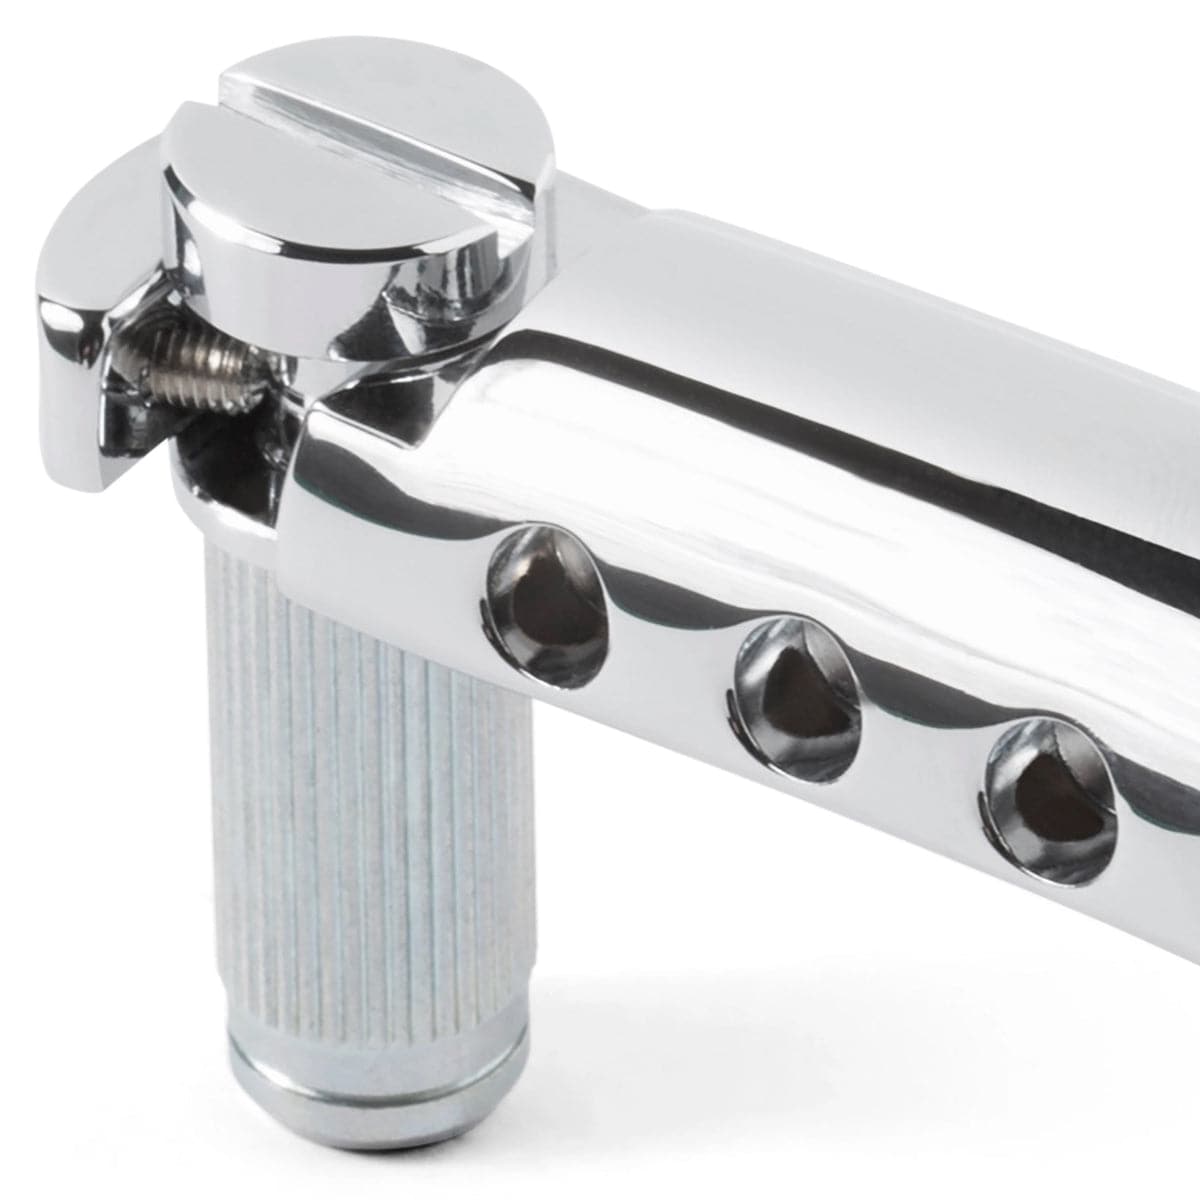 TonePros T1ZS Stopbar Tailpiece for Gibson Les Paul & SG - Chrome